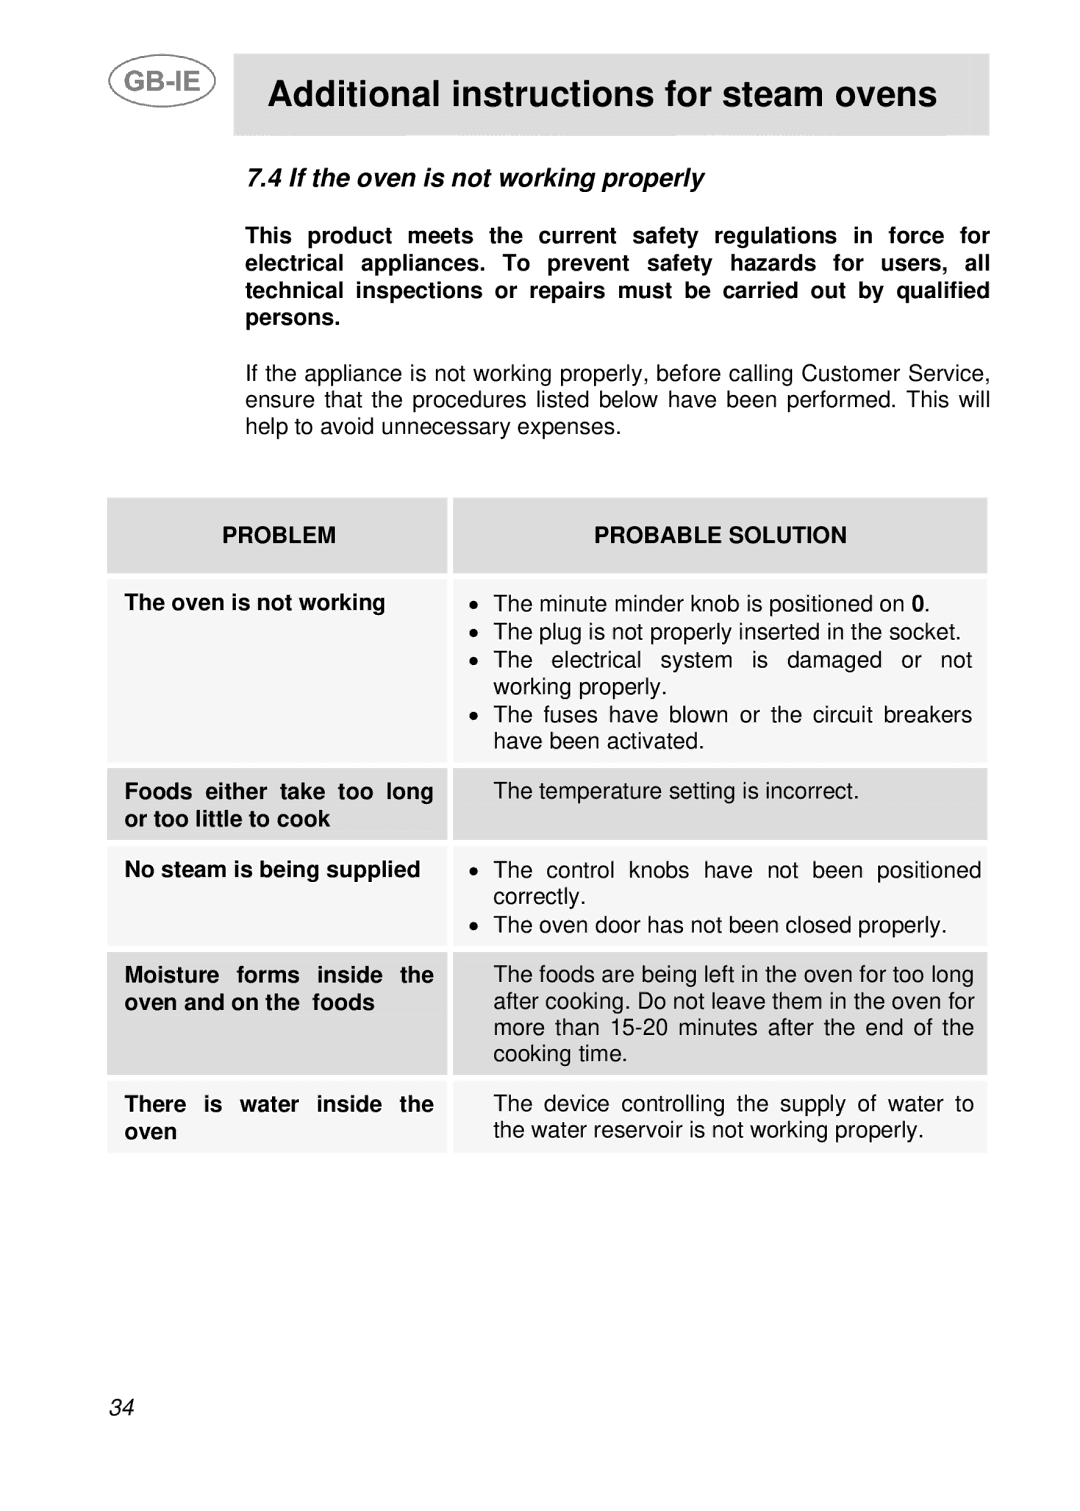 Smeg FOVP manual If the oven is not working properly, Problem, Probable Solution 